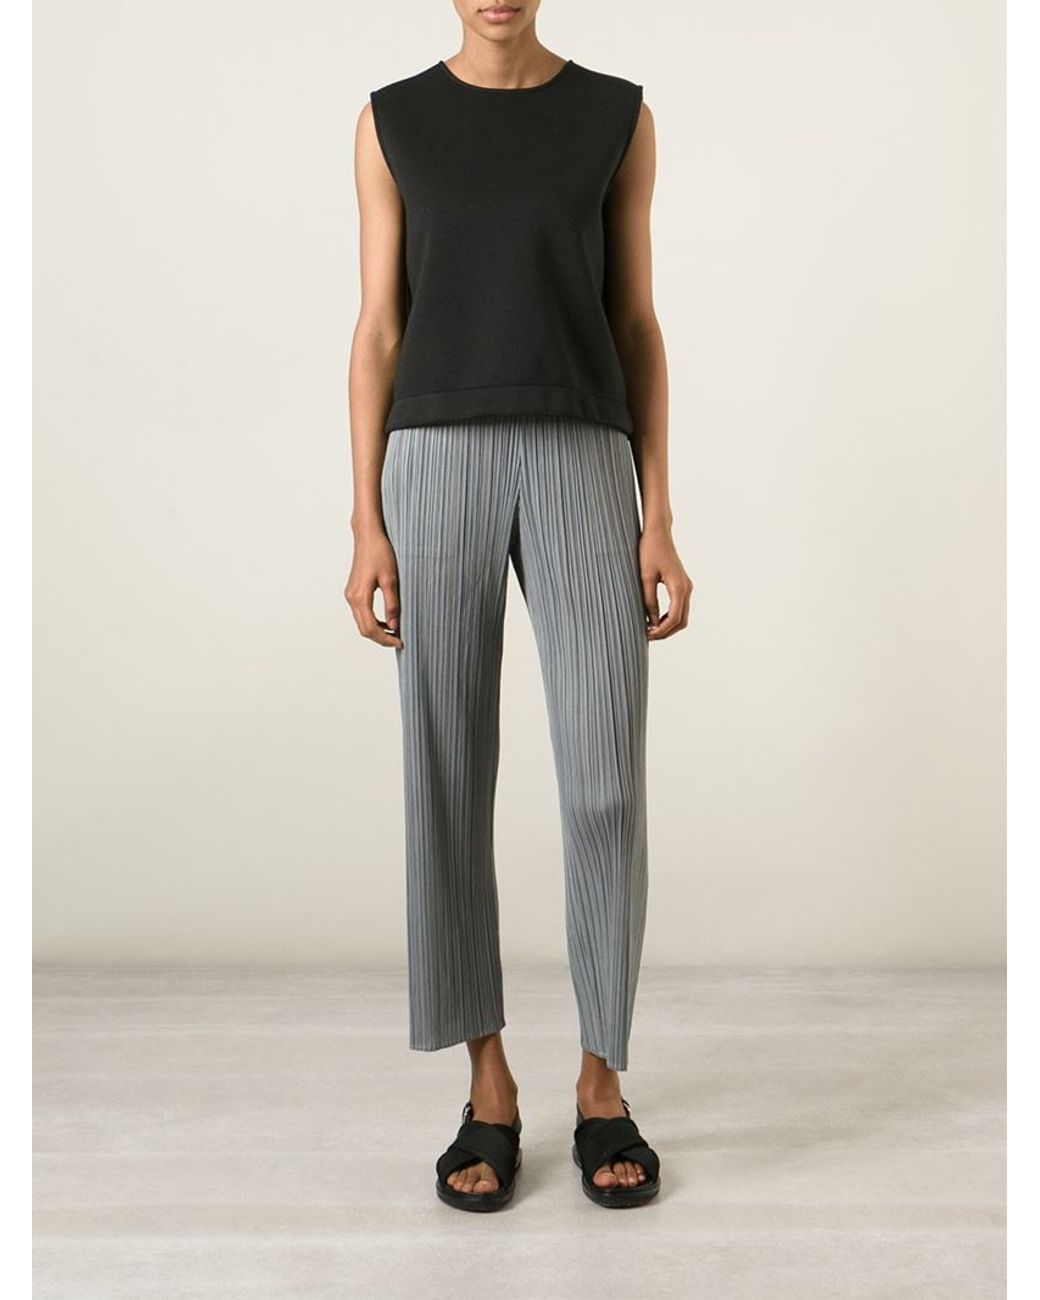 Black Oval Trousers by Pleats Please Issey Miyake on Sale